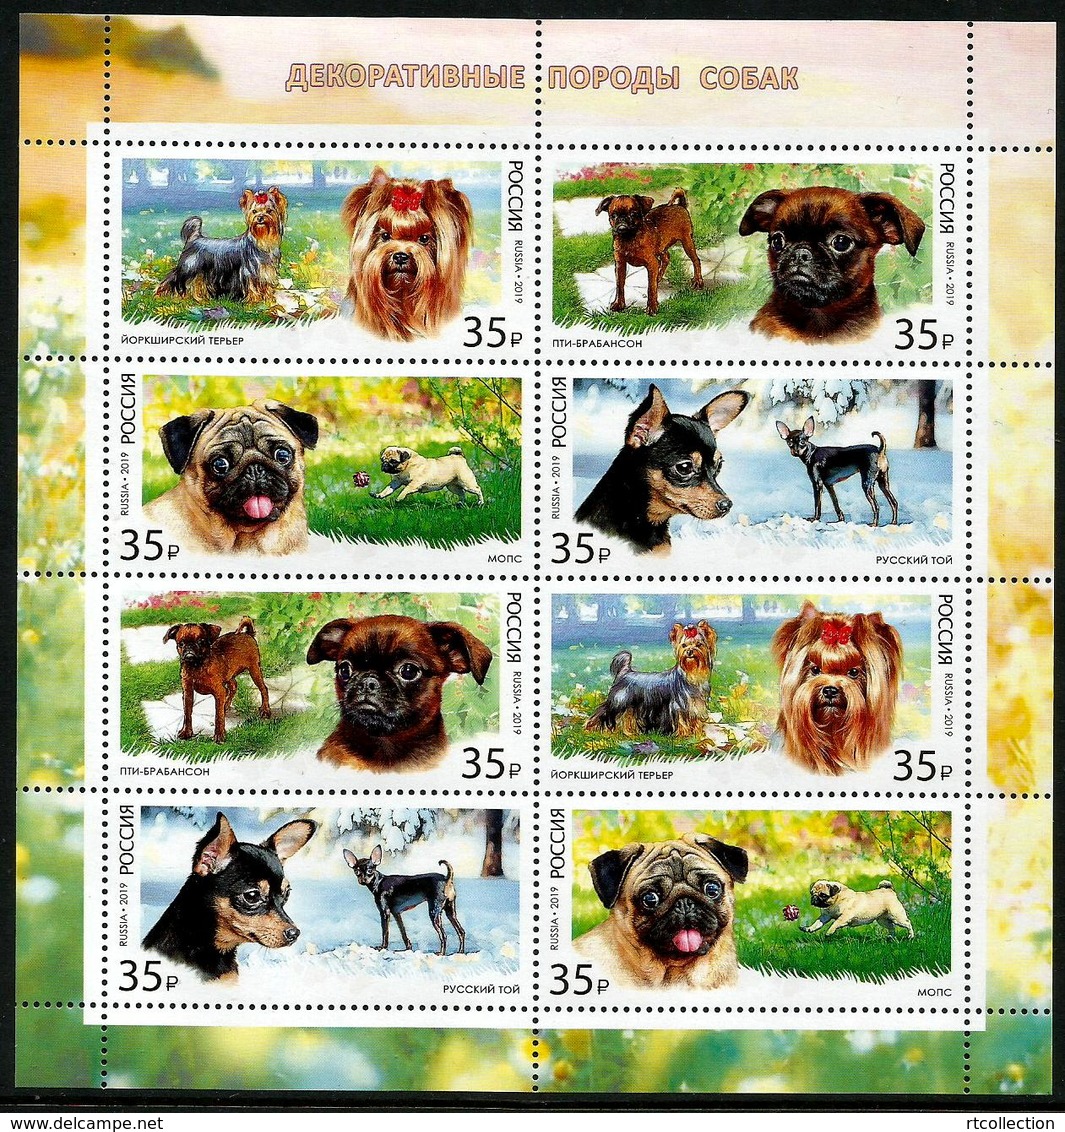 Russia 2019 Sheet Decorative Toy Dogs Dog Animals Fauna Mammals Nature Animal Mammal Stamps MNH - Unused Stamps